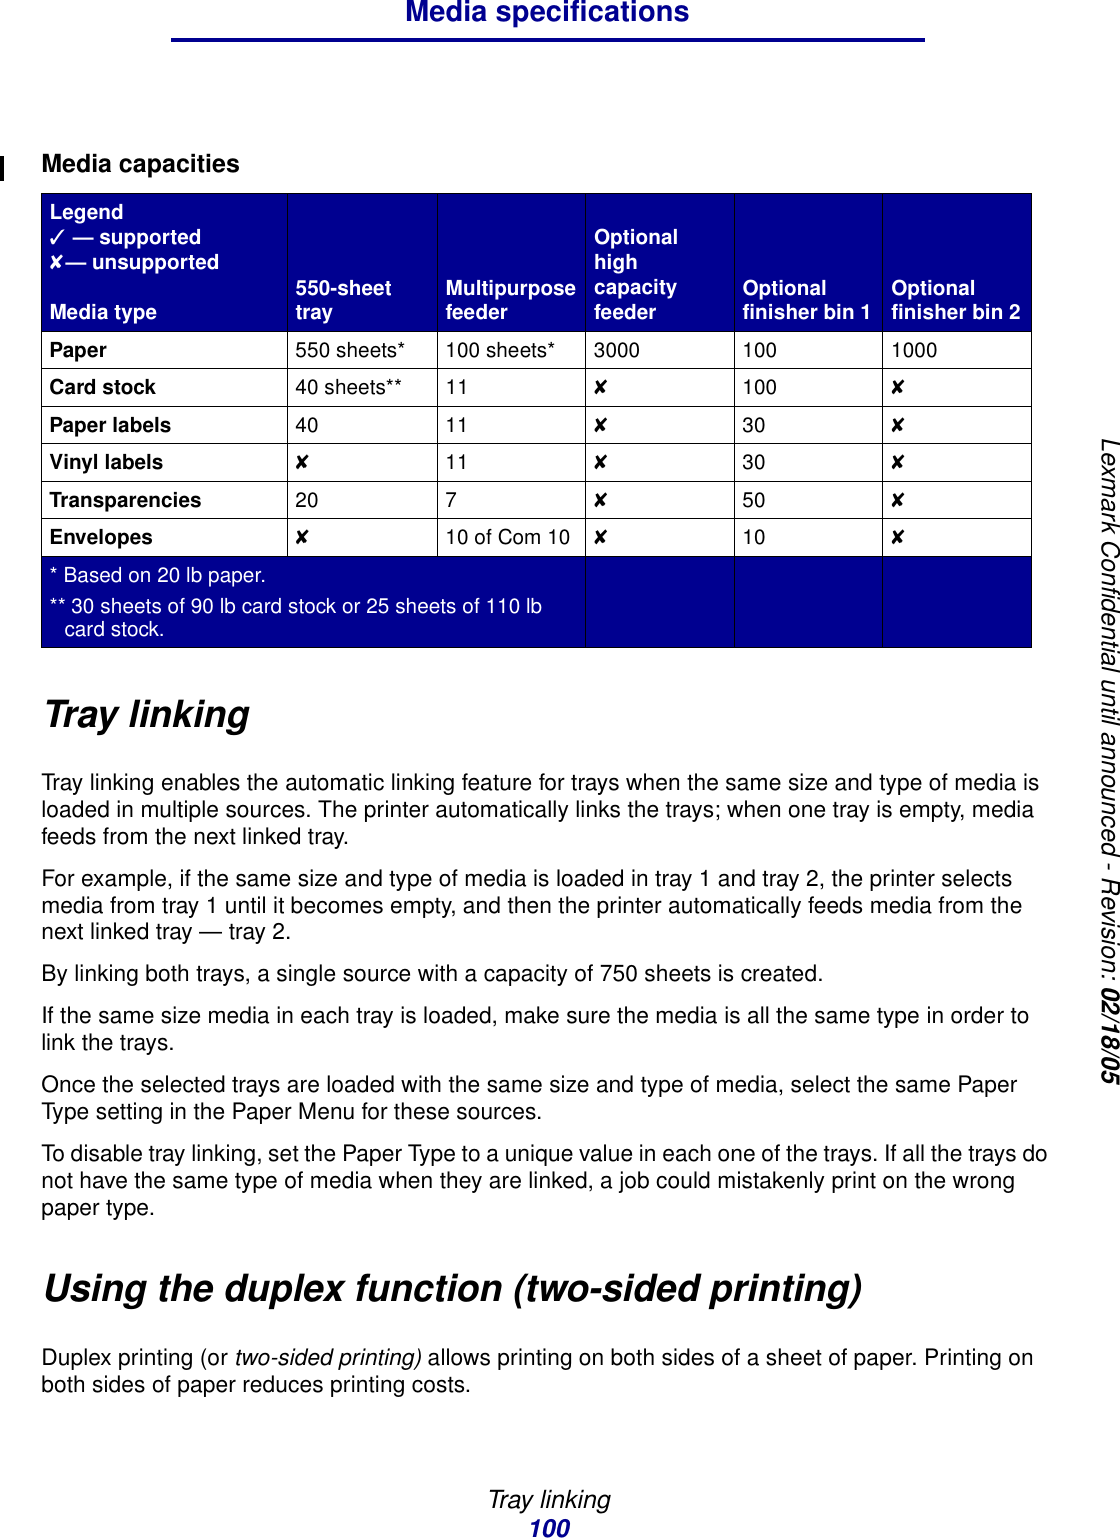 Tray linking100Media specificationsLexmark Confidential until announced - Revision: 02/18/05Tray linkingTray linking enables the automatic linking feature for trays when the same size and type of media is loaded in multiple sources. The printer automatically links the trays; when one tray is empty, media feeds from the next linked tray.For example, if the same size and type of media is loaded in tray 1 and tray 2, the printer selects media from tray 1 until it becomes empty, and then the printer automatically feeds media from the next linked tray — tray 2.By linking both trays, a single source with a capacity of 750 sheets is created.If the same size media in each tray is loaded, make sure the media is all the same type in order to link the trays.Once the selected trays are loaded with the same size and type of media, select the same Paper Type setting in the Paper Menu for these sources.To disable tray linking, set the Paper Type to a unique value in each one of the trays. If all the trays do not have the same type of media when they are linked, a job could mistakenly print on the wrong paper type.Using the duplex function (two-sided printing)Duplex printing (or two-sided printing) allows printing on both sides of a sheet of paper. Printing on both sides of paper reduces printing costs.Media capacitiesLegend✓ — supported✘— unsupportedMedia type 550-sheet tray Multipurpose feederOptional high capacity feeder Optional finisher bin 1 Optional finisher bin 2Paper 550 sheets* 100 sheets* 3000 100 1000Card stock 40 sheets** 11 ✘100 ✘Paper labels 40 11 ✘30 ✘Vinyl labels ✘11 ✘30 ✘Transparencies 20 7 ✘50 ✘Envelopes ✘10 of Com 10 ✘10 ✘* Based on 20 lb paper.** 30 sheets of 90 lb card stock or 25 sheets of 110 lb card stock.